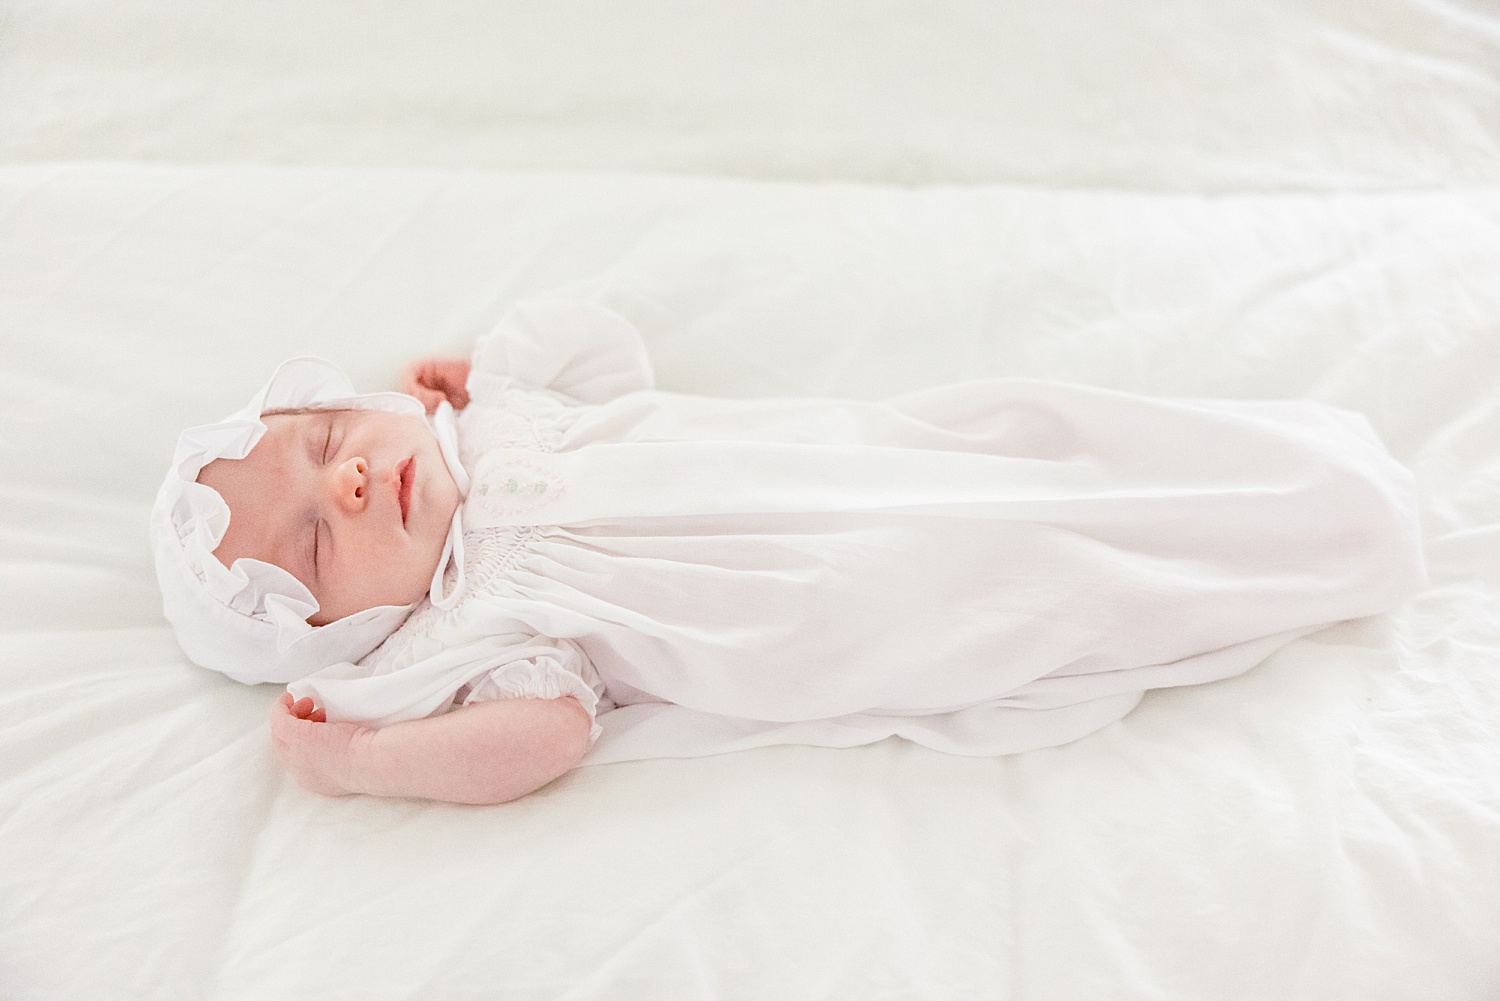 newborn baby sleeps soundly during session